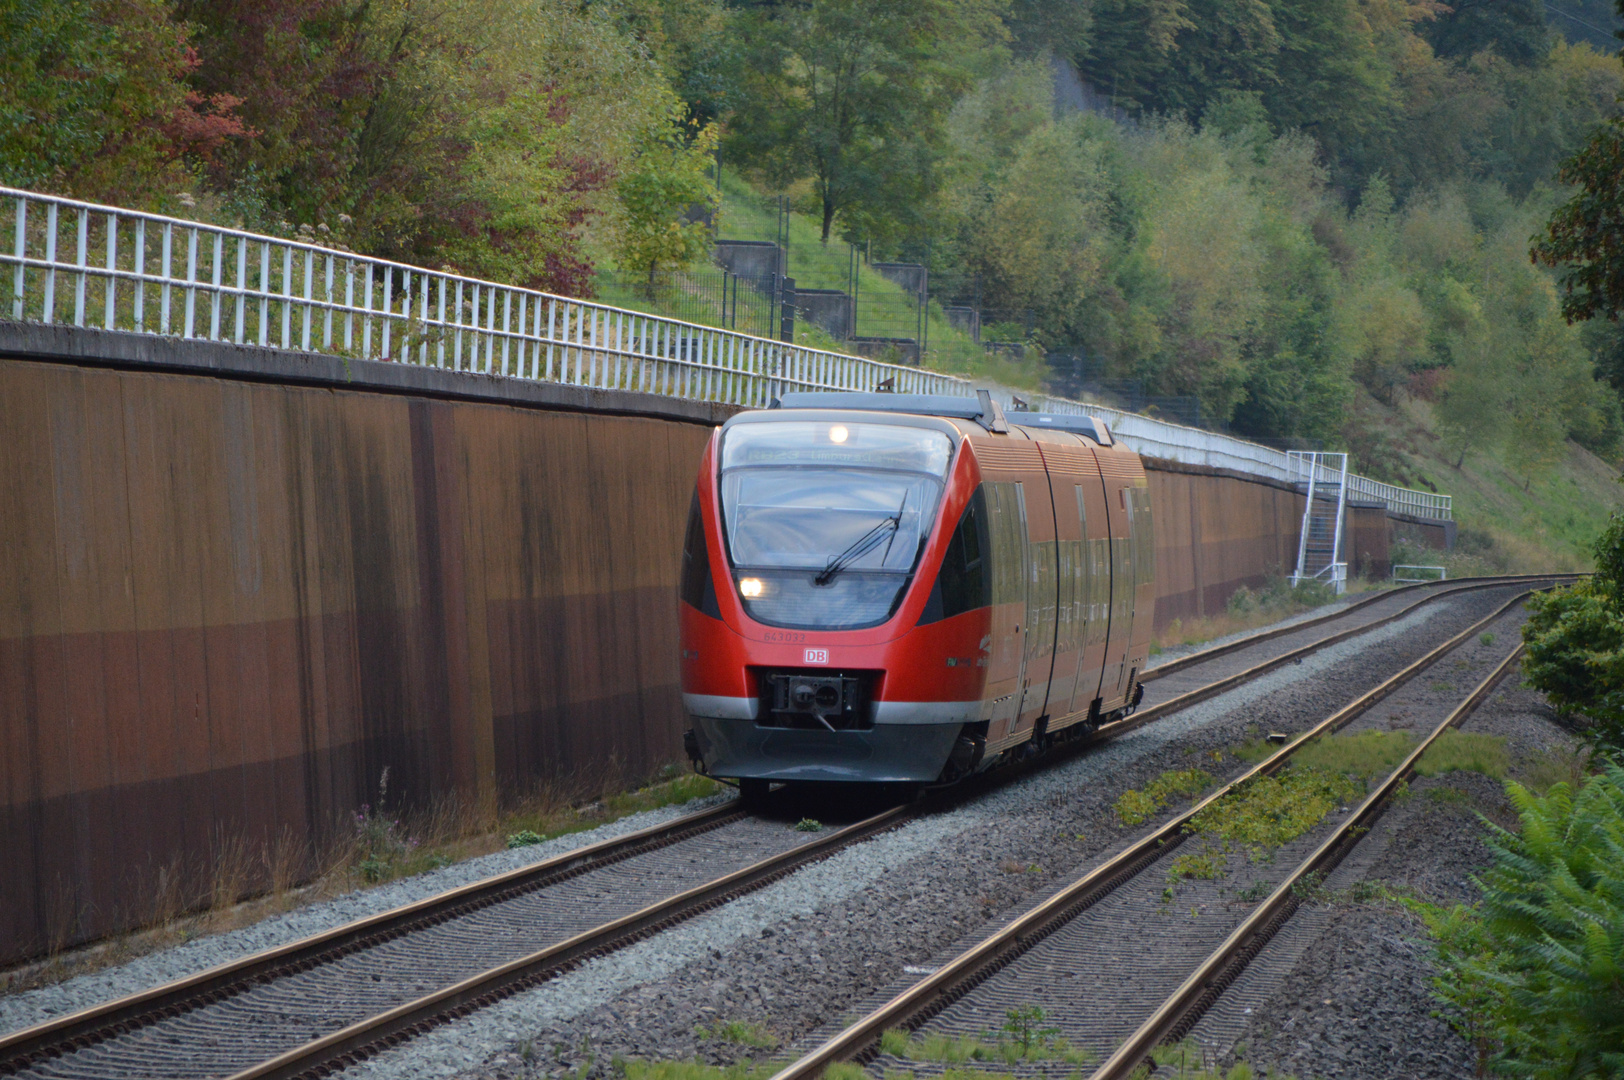 643 033 in Bad Ems